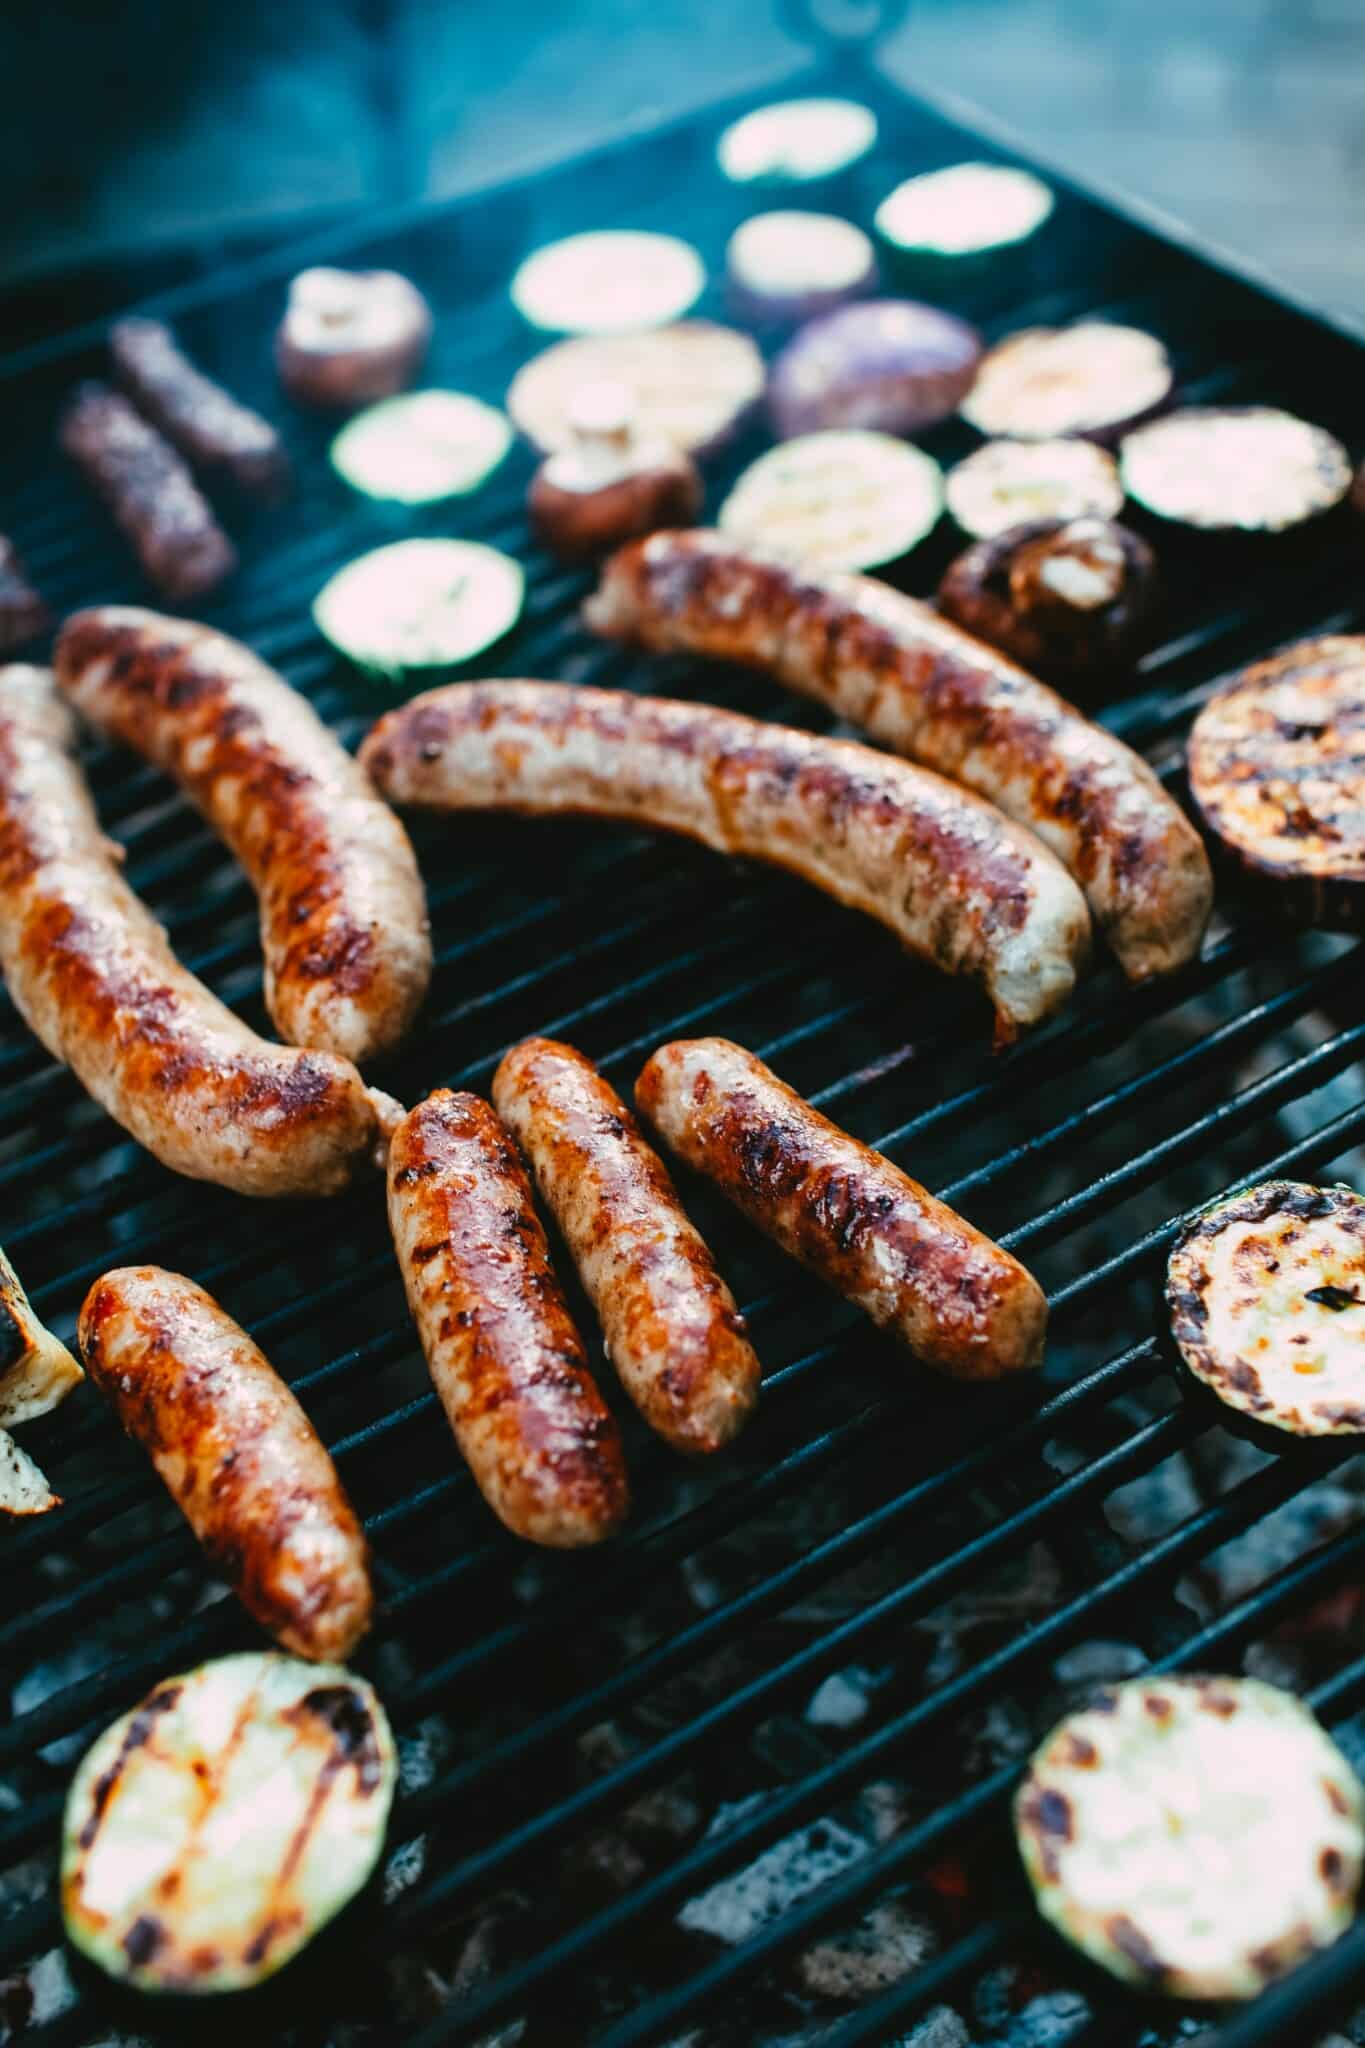 Swaggerty's Sausage links on a grill with grilled vegetables.